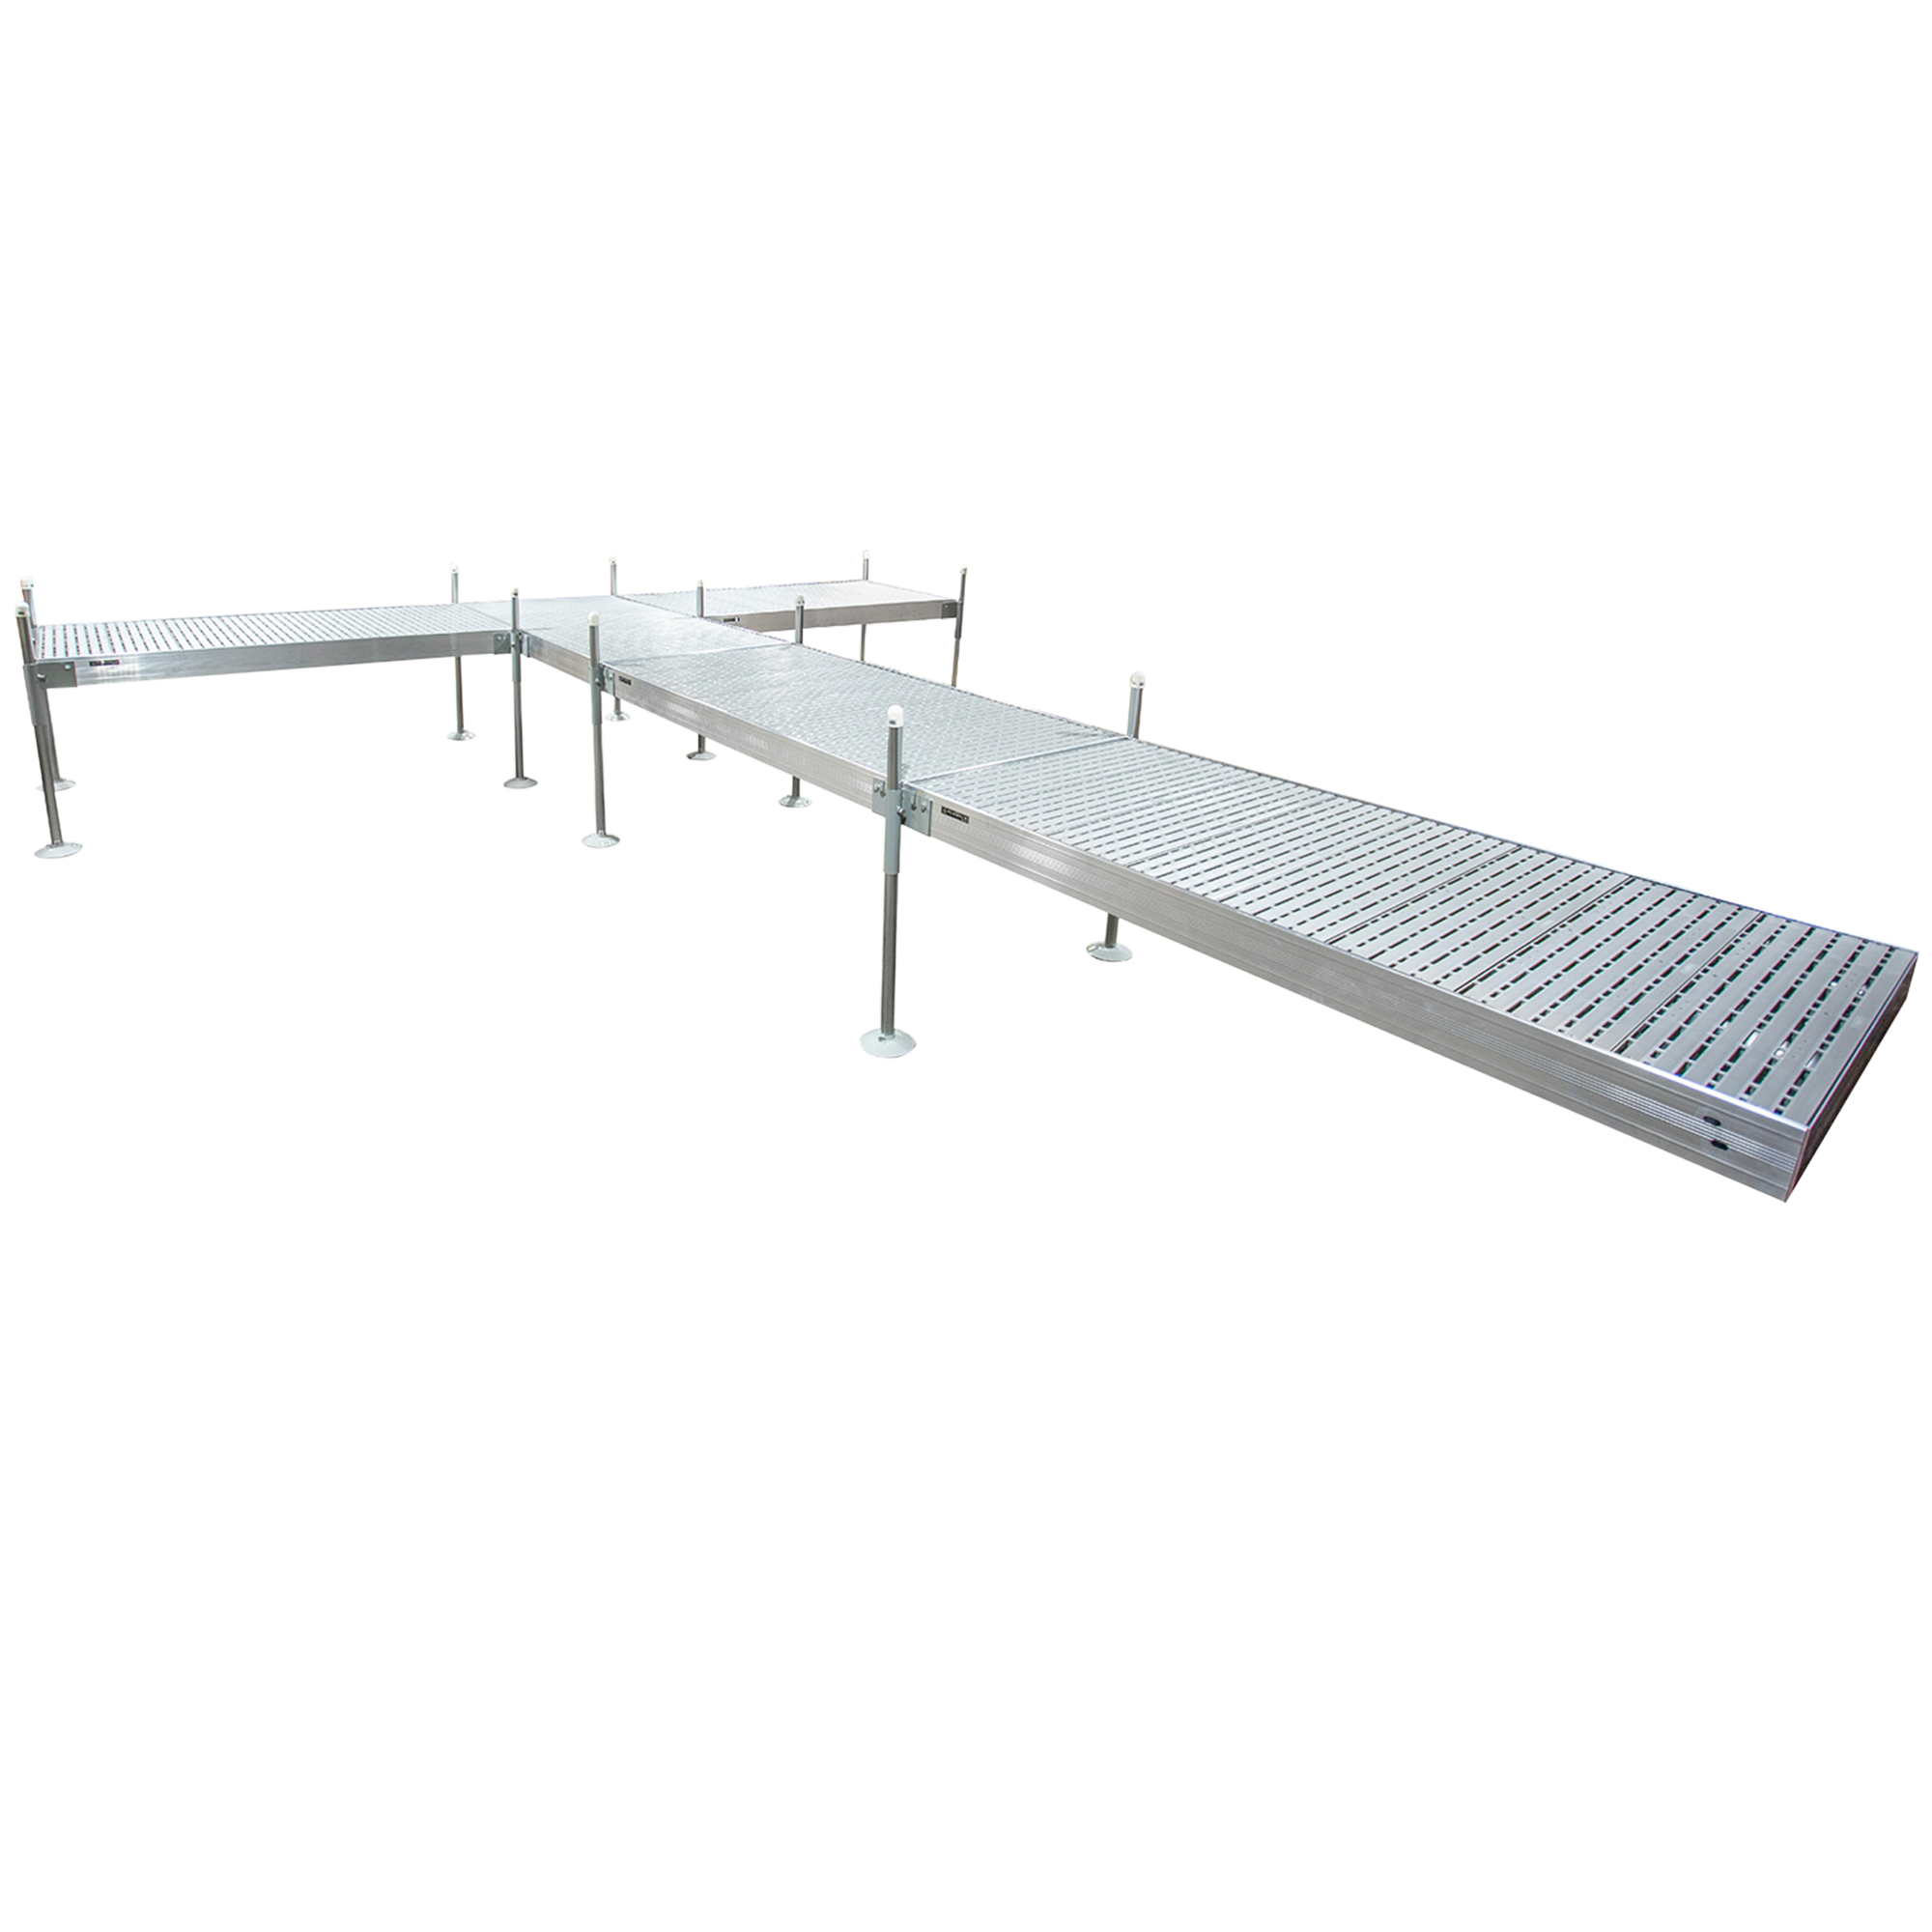 24' T-Shaped Boat Dock System with Aluminum Frame and Gray Titan Decking